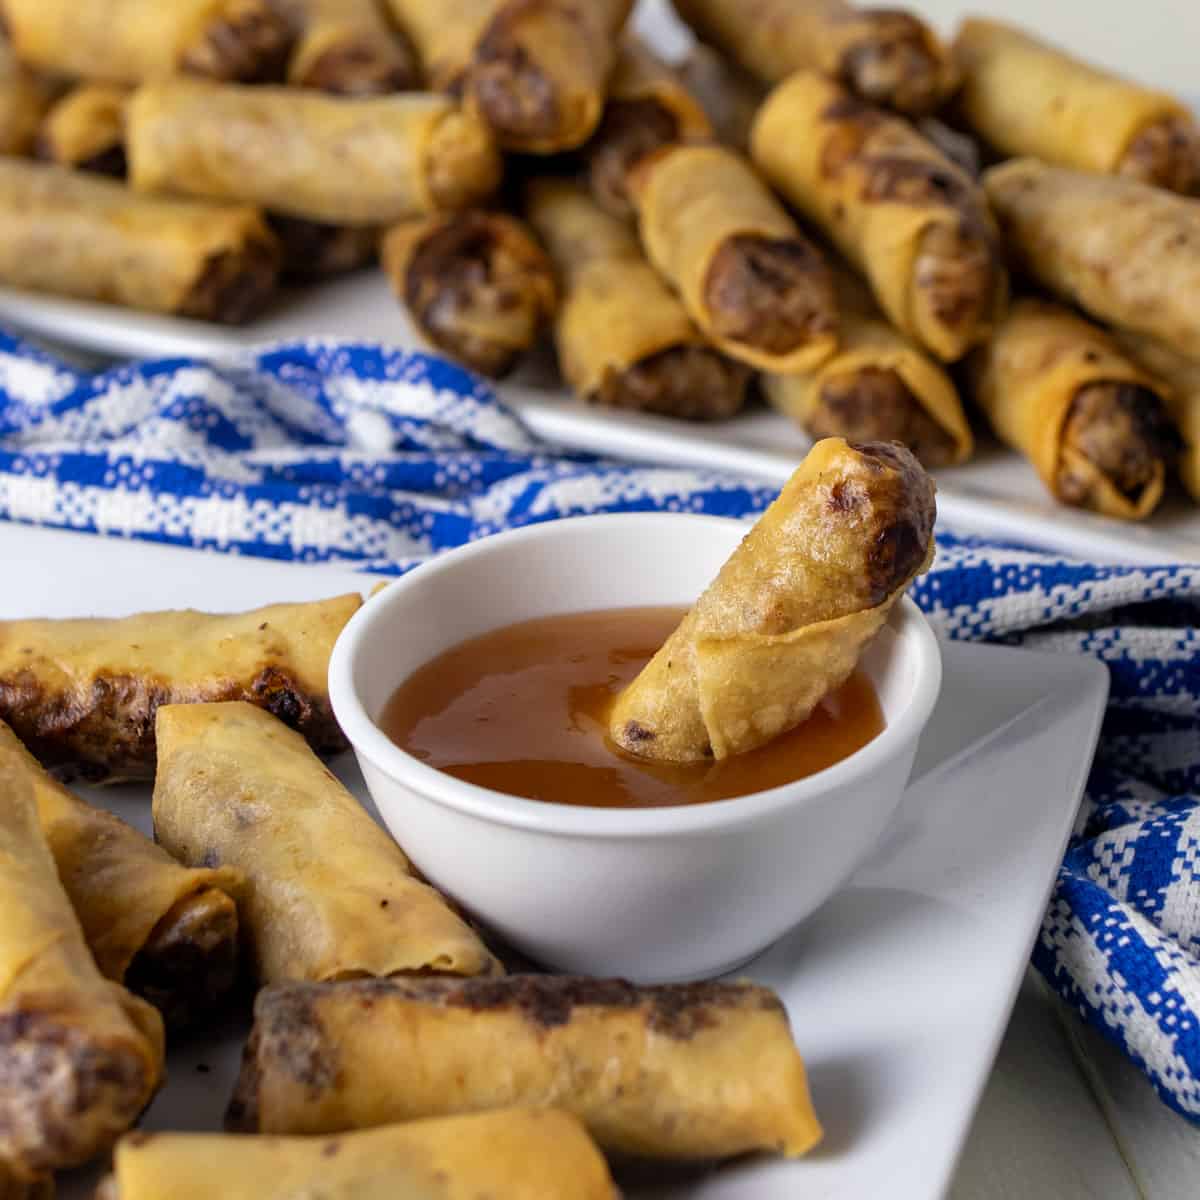 A spring roll dipped in a bowl of plum sauce.